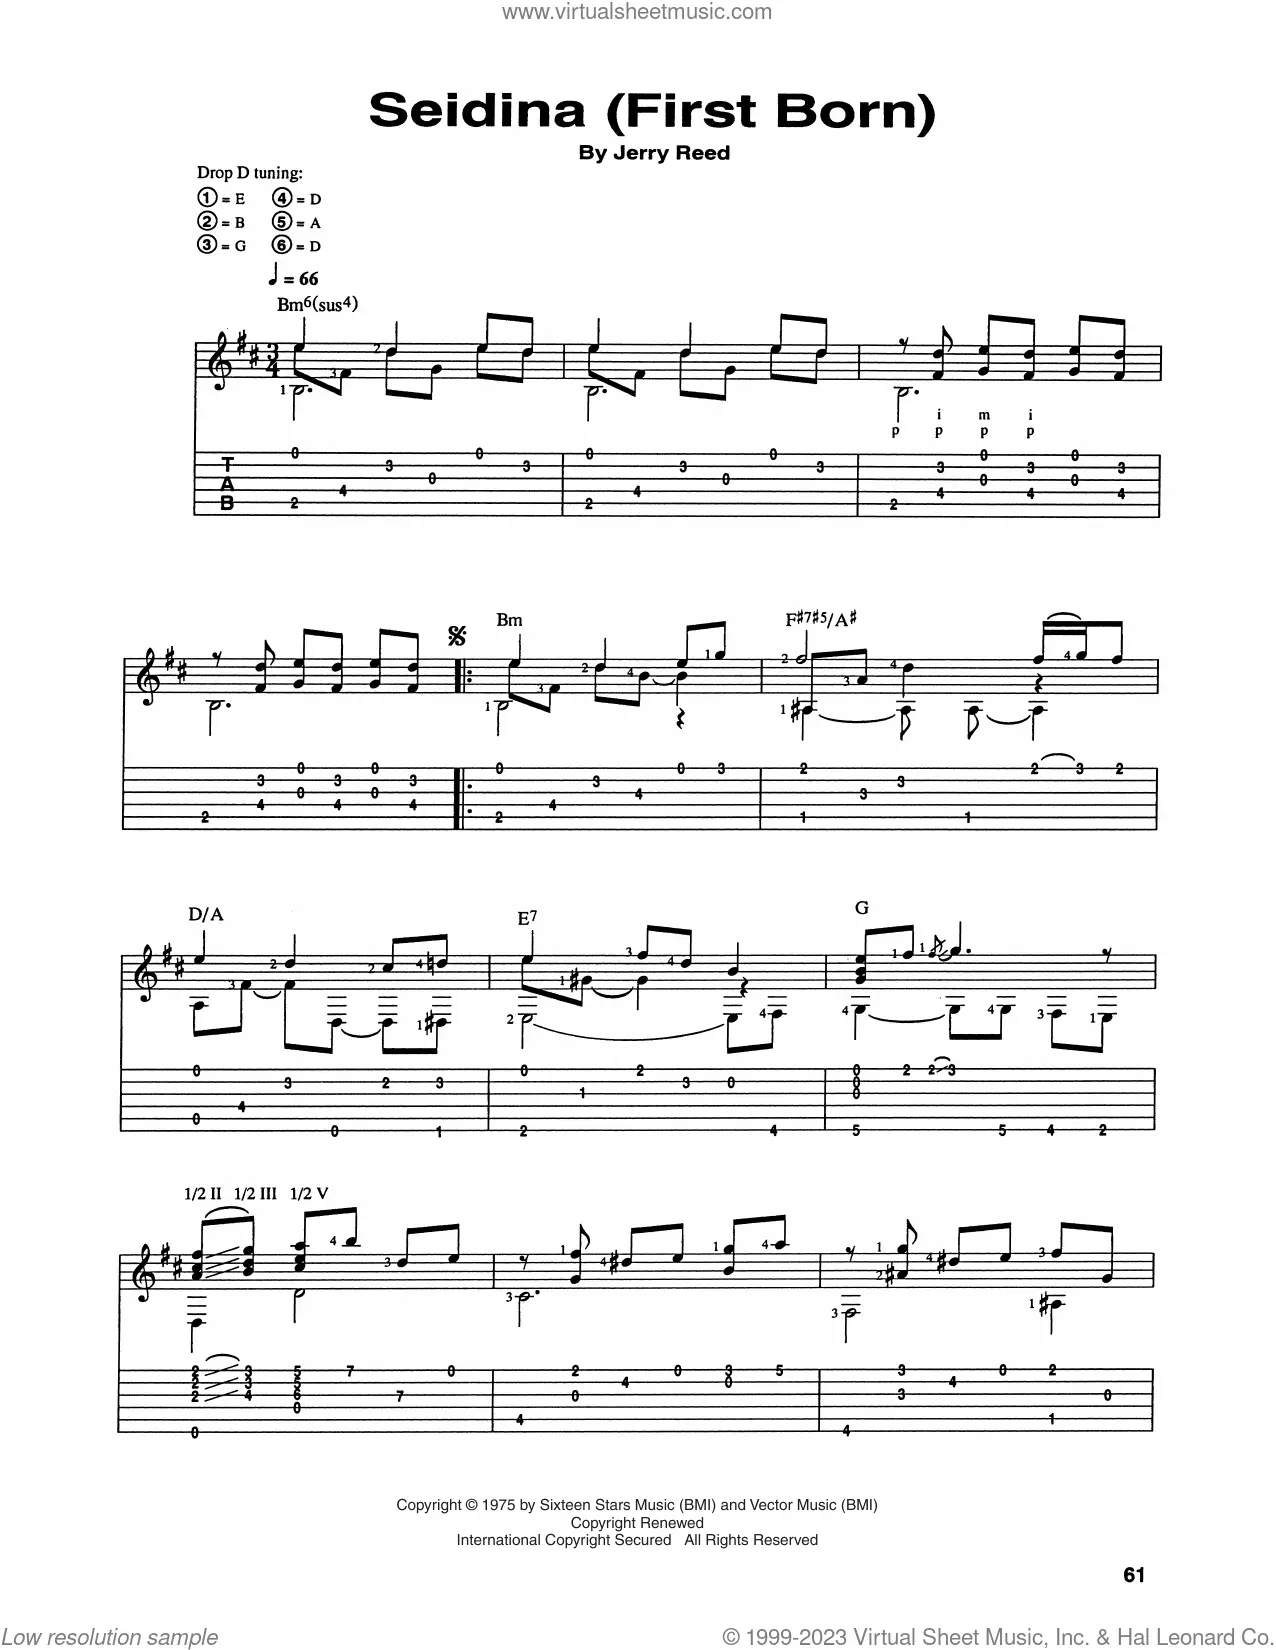 Old time song lyrics with guitar chords for Mockingbird Hill G in 2023